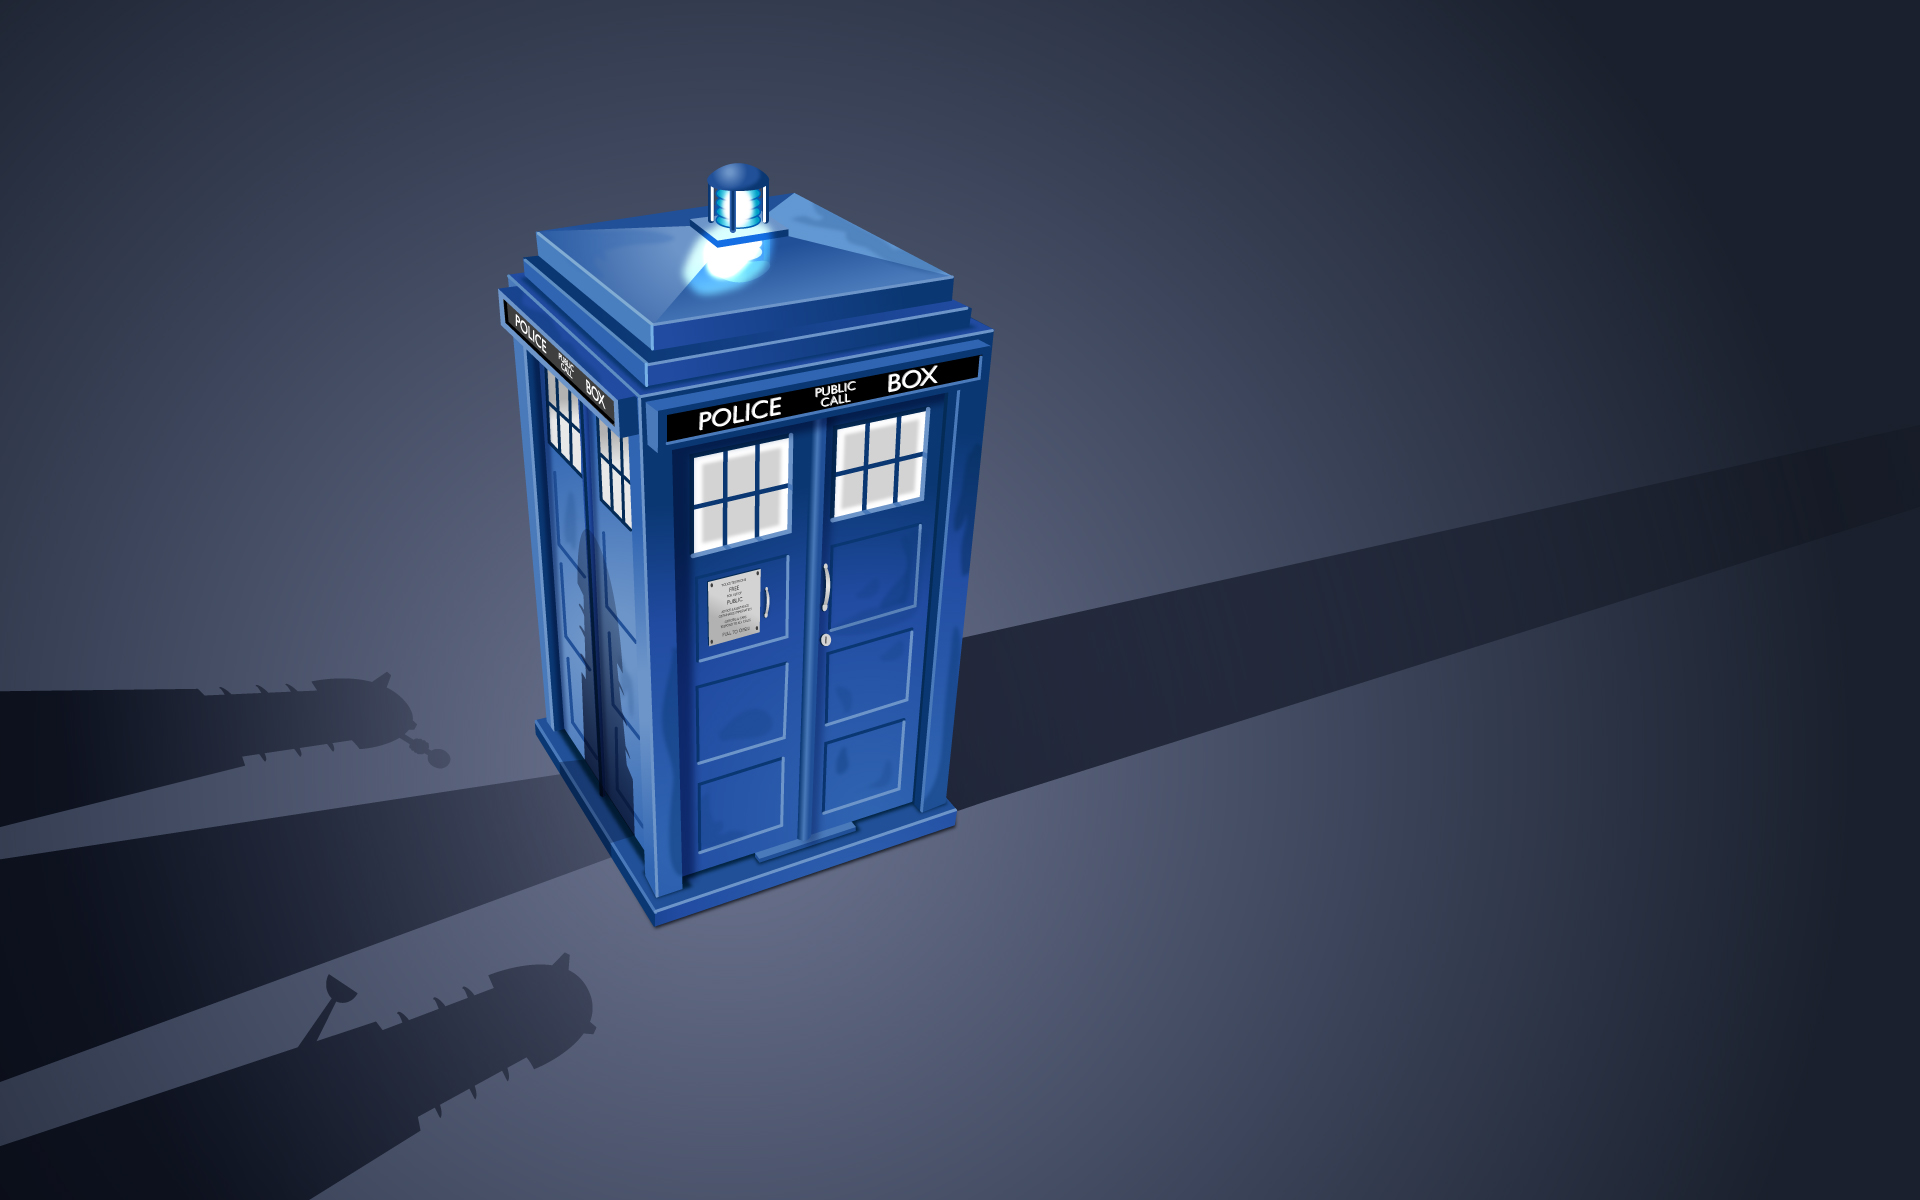 Doctor Who Wallpaper by Michael Flarup on Dribbble